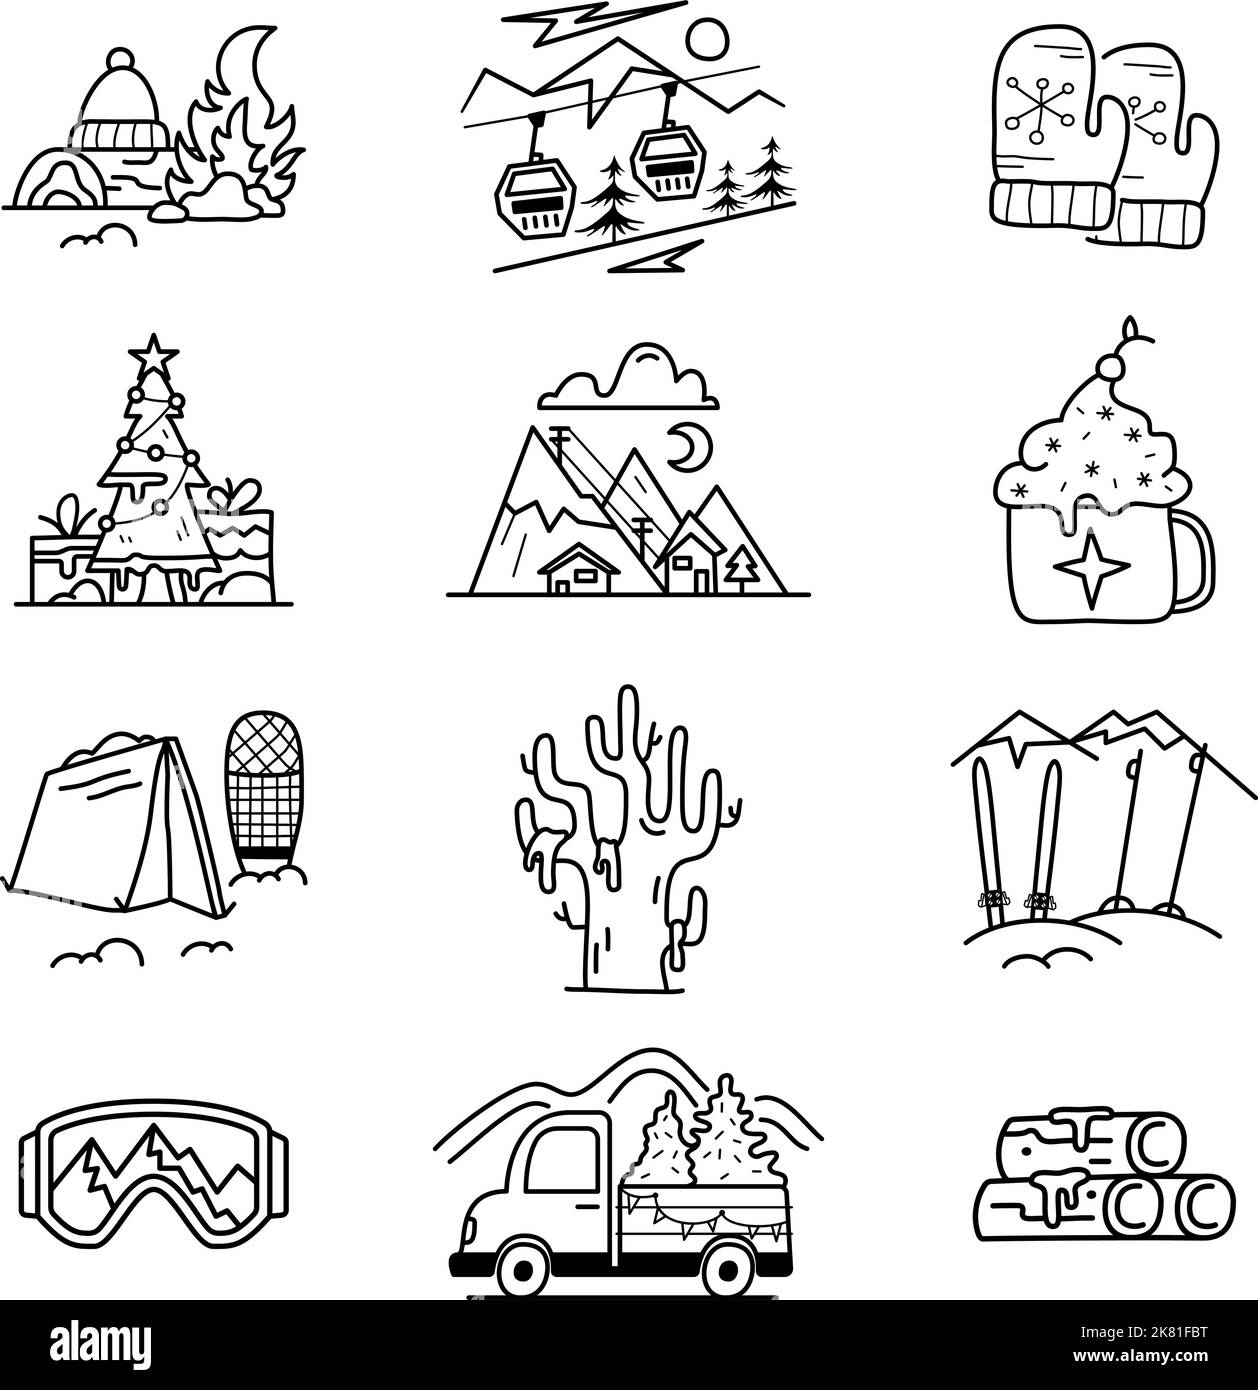 Christmas camping icons and elements in line art style. Silhouette travel symbols icluding tent, christmas trees, gift boxes. Stock vector graphics Stock Vector